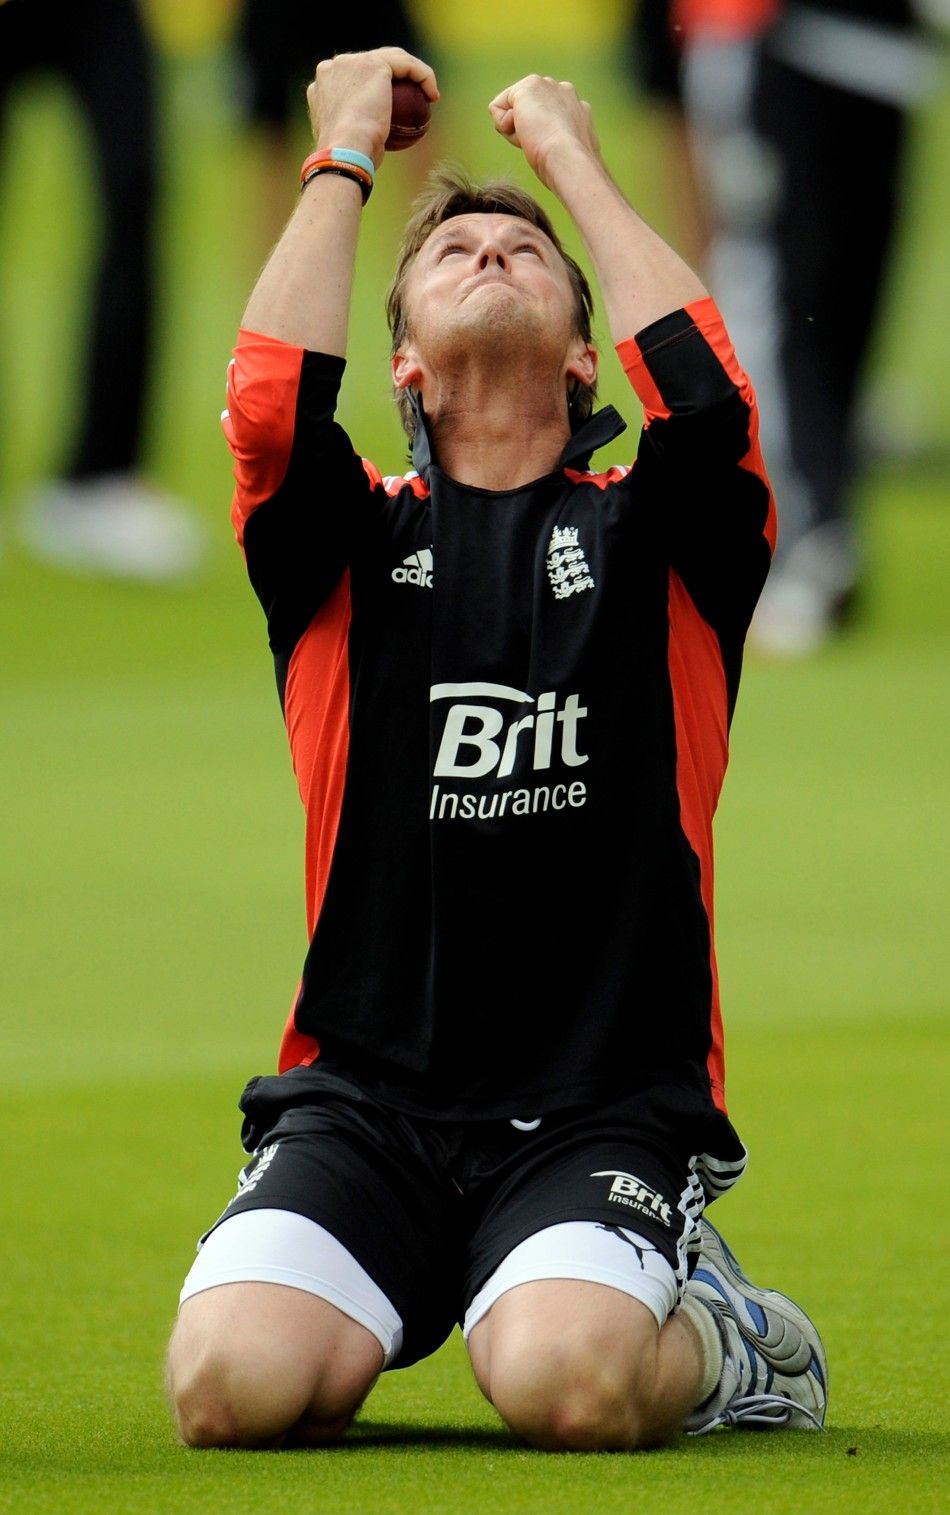 England039s Swann reacts after taking a catch during a training session before Thursday039s first cricket test match against India at Lord039s cricket ground in London.